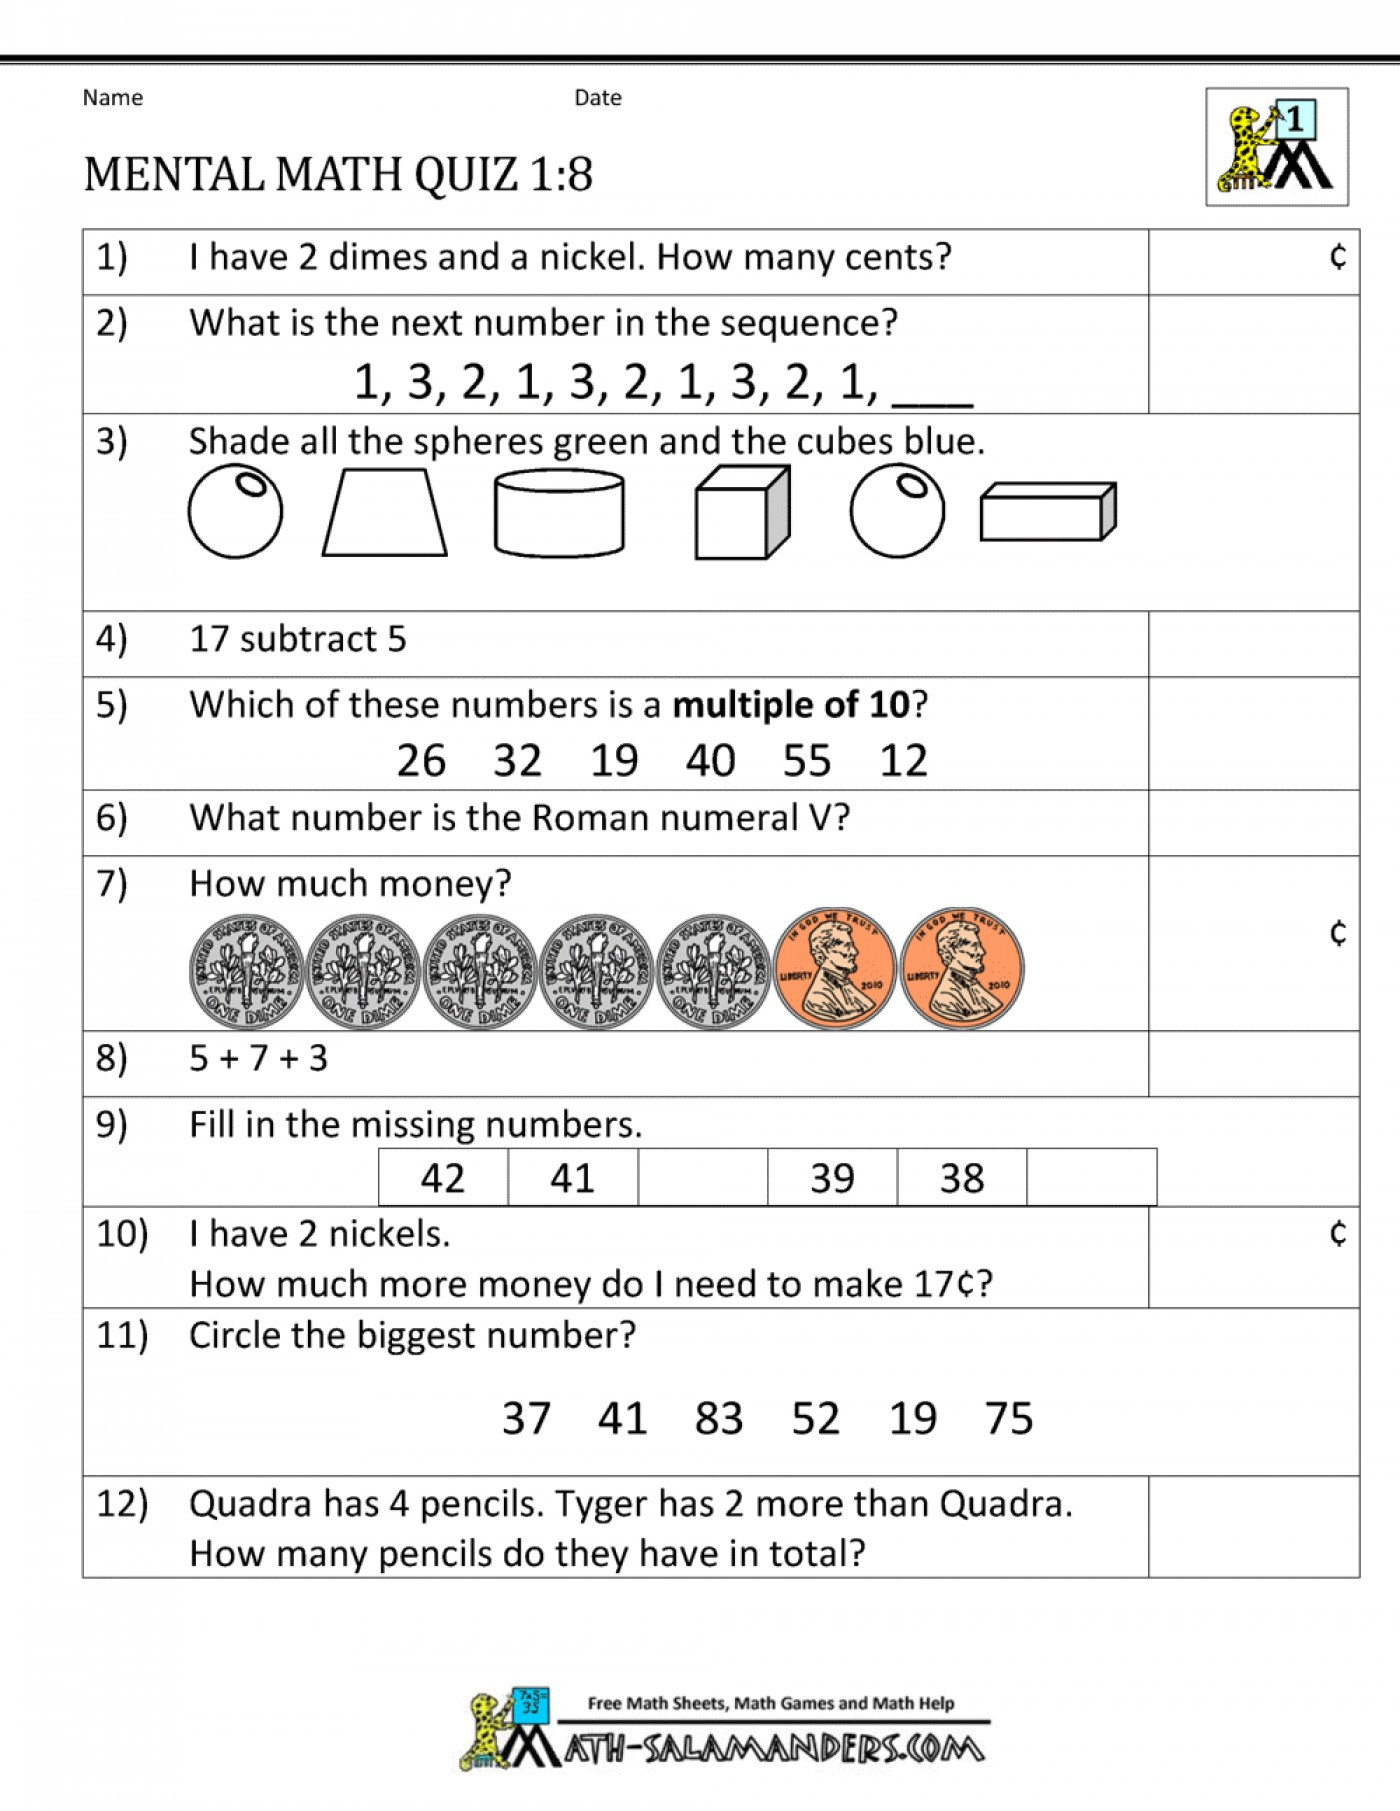 Free Math Worksheets Second Grade 2 Addition Adding whole Tens 2 Digits